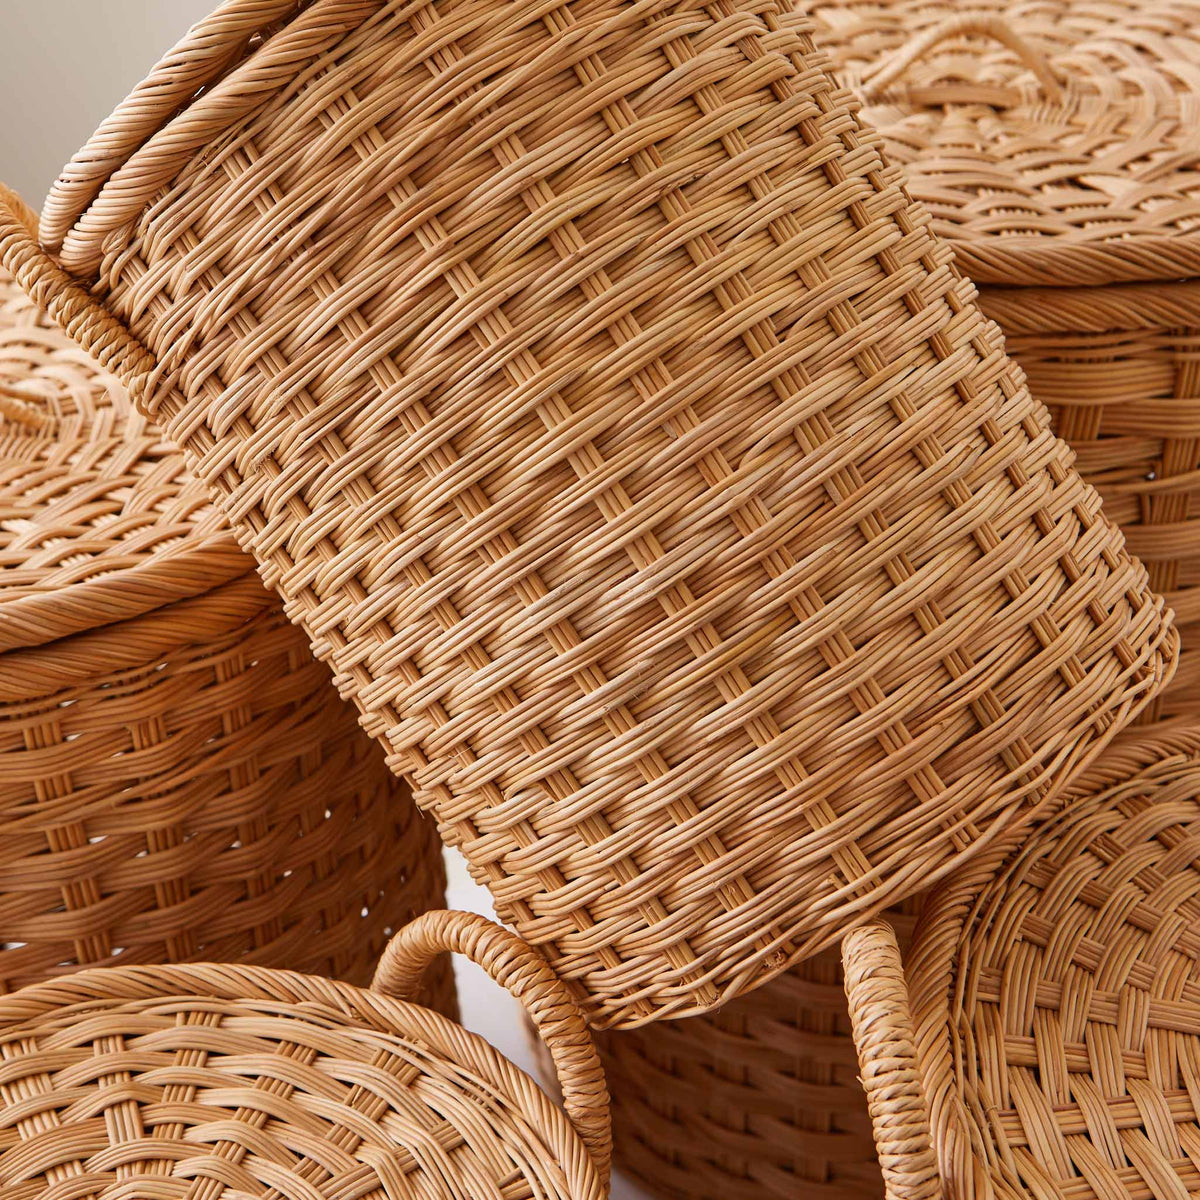 Round rattan storage baskets with lids and handles. Perfect baskets for clothes, bathroom storage baskets, or baskets for shelves. XL, L, M, S, XS.